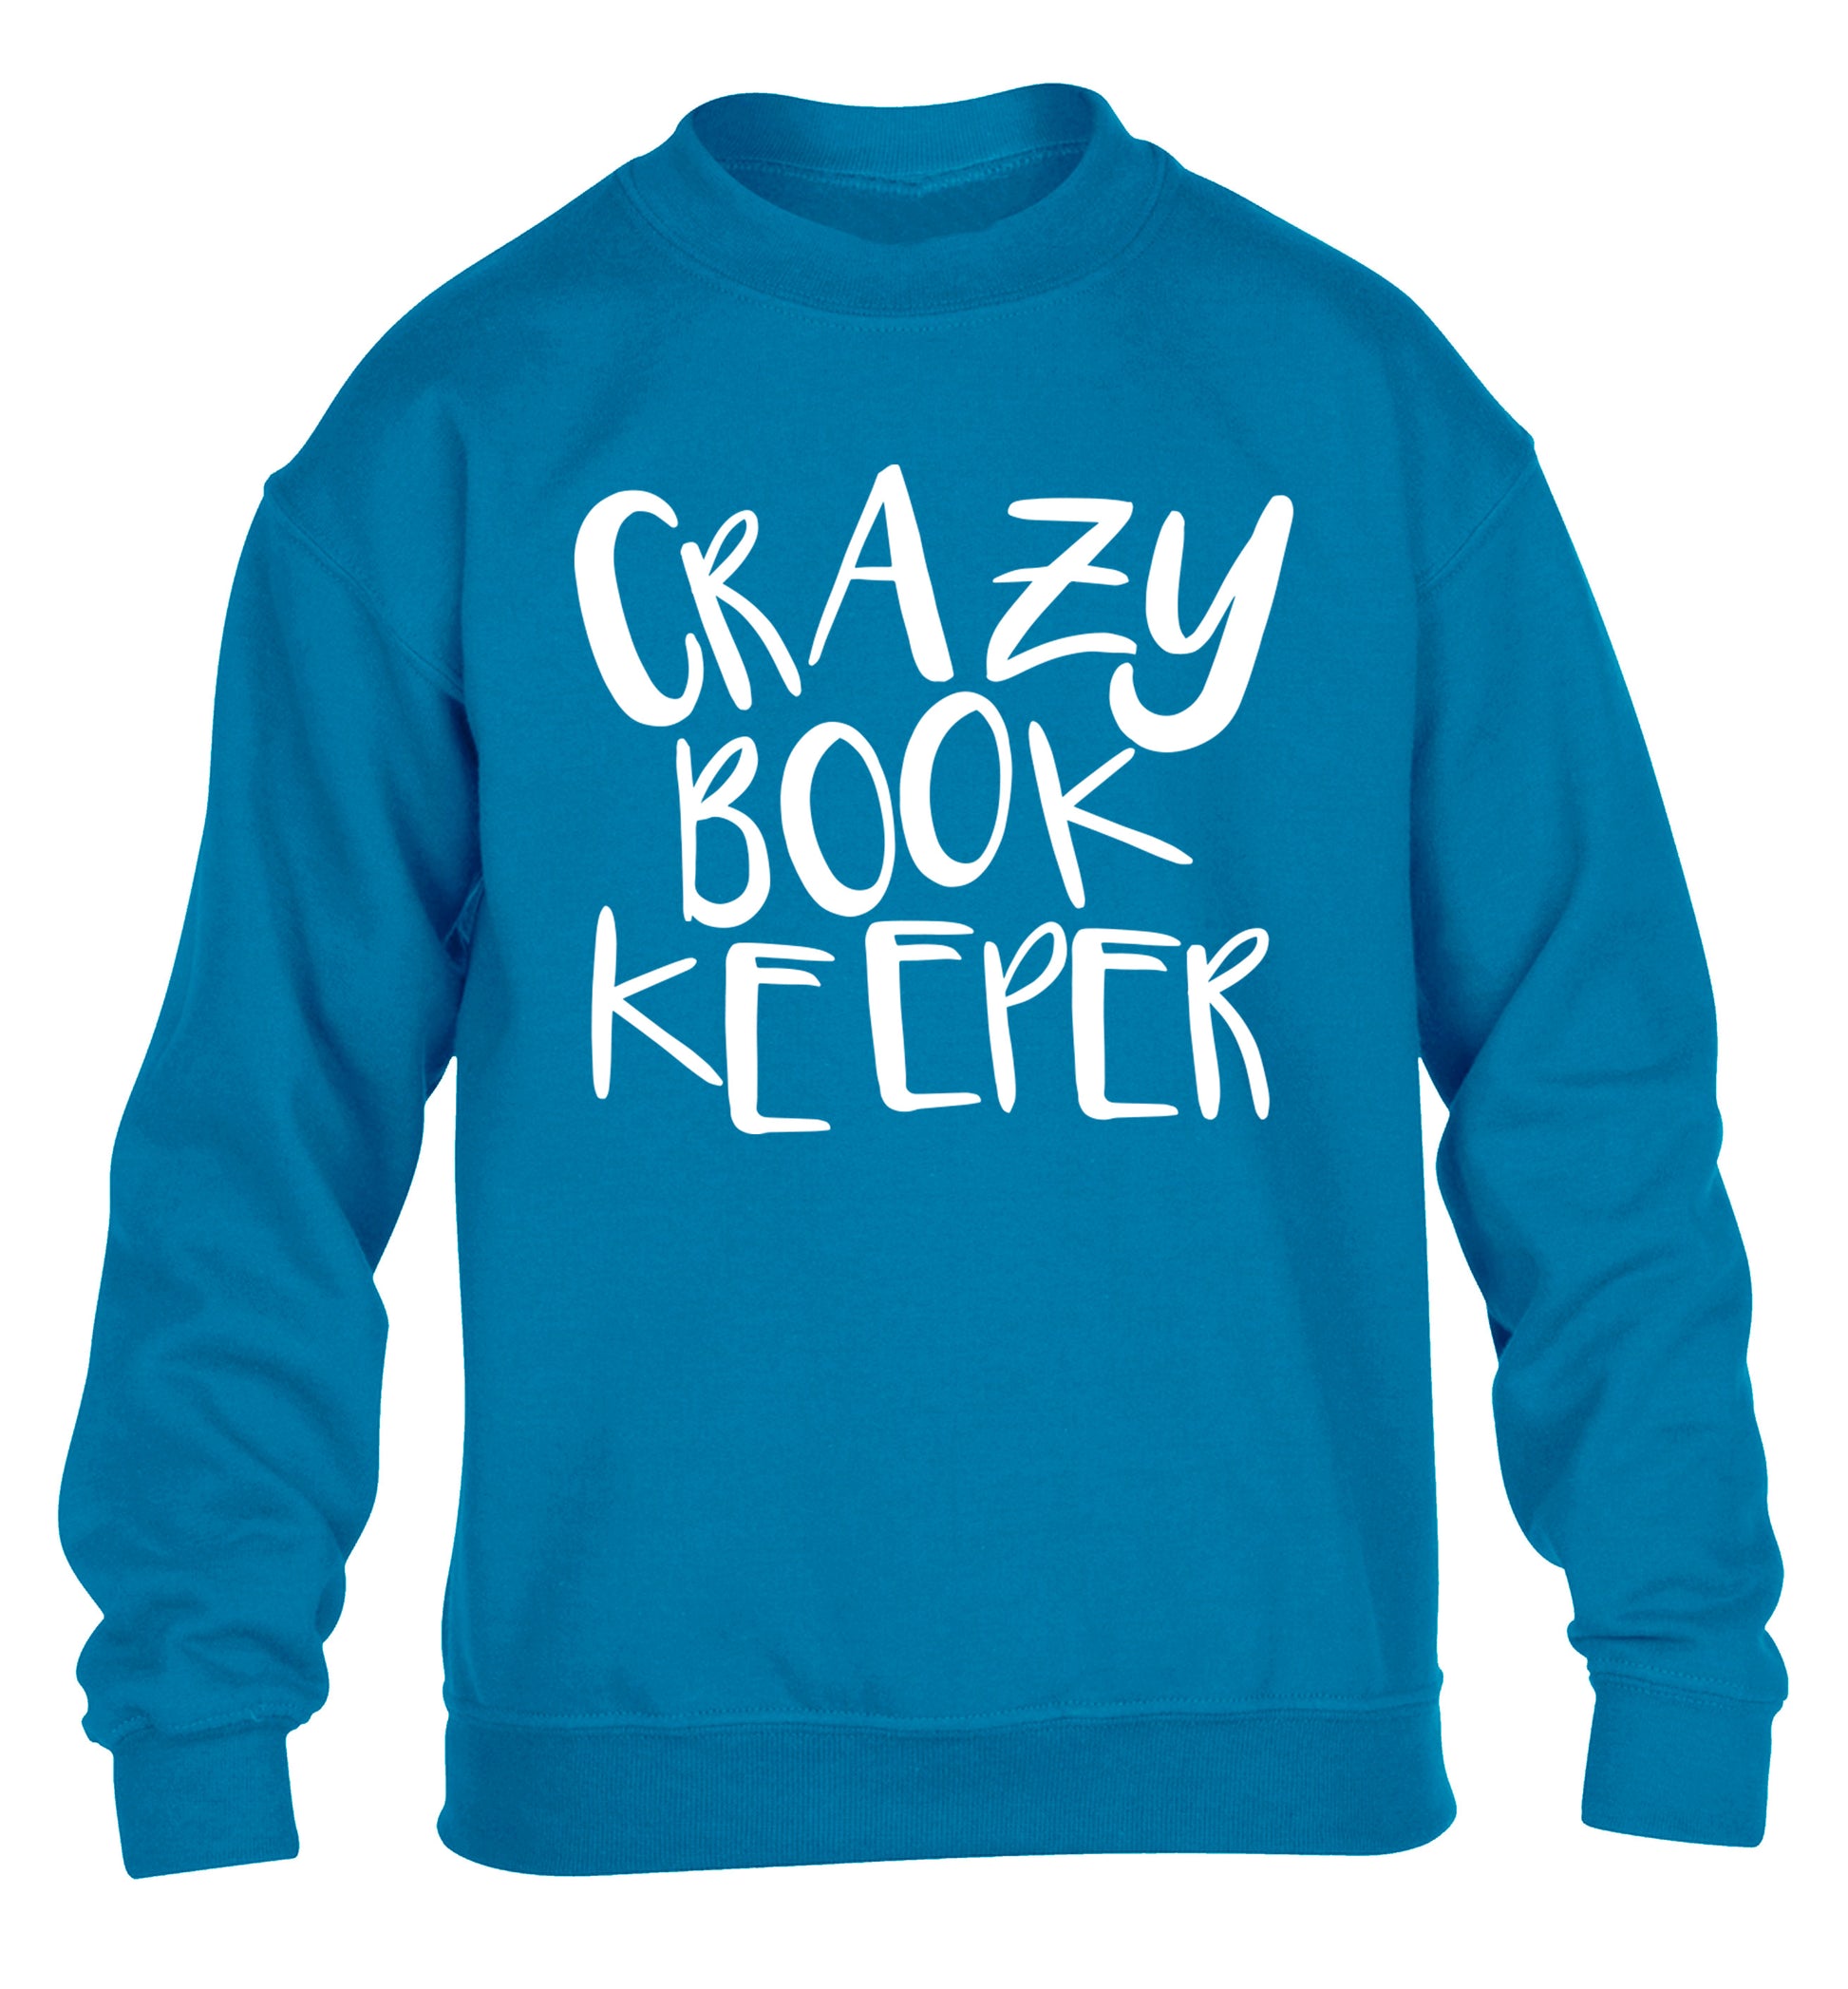 Crazy bookkeeper children's blue sweater 12-13 Years